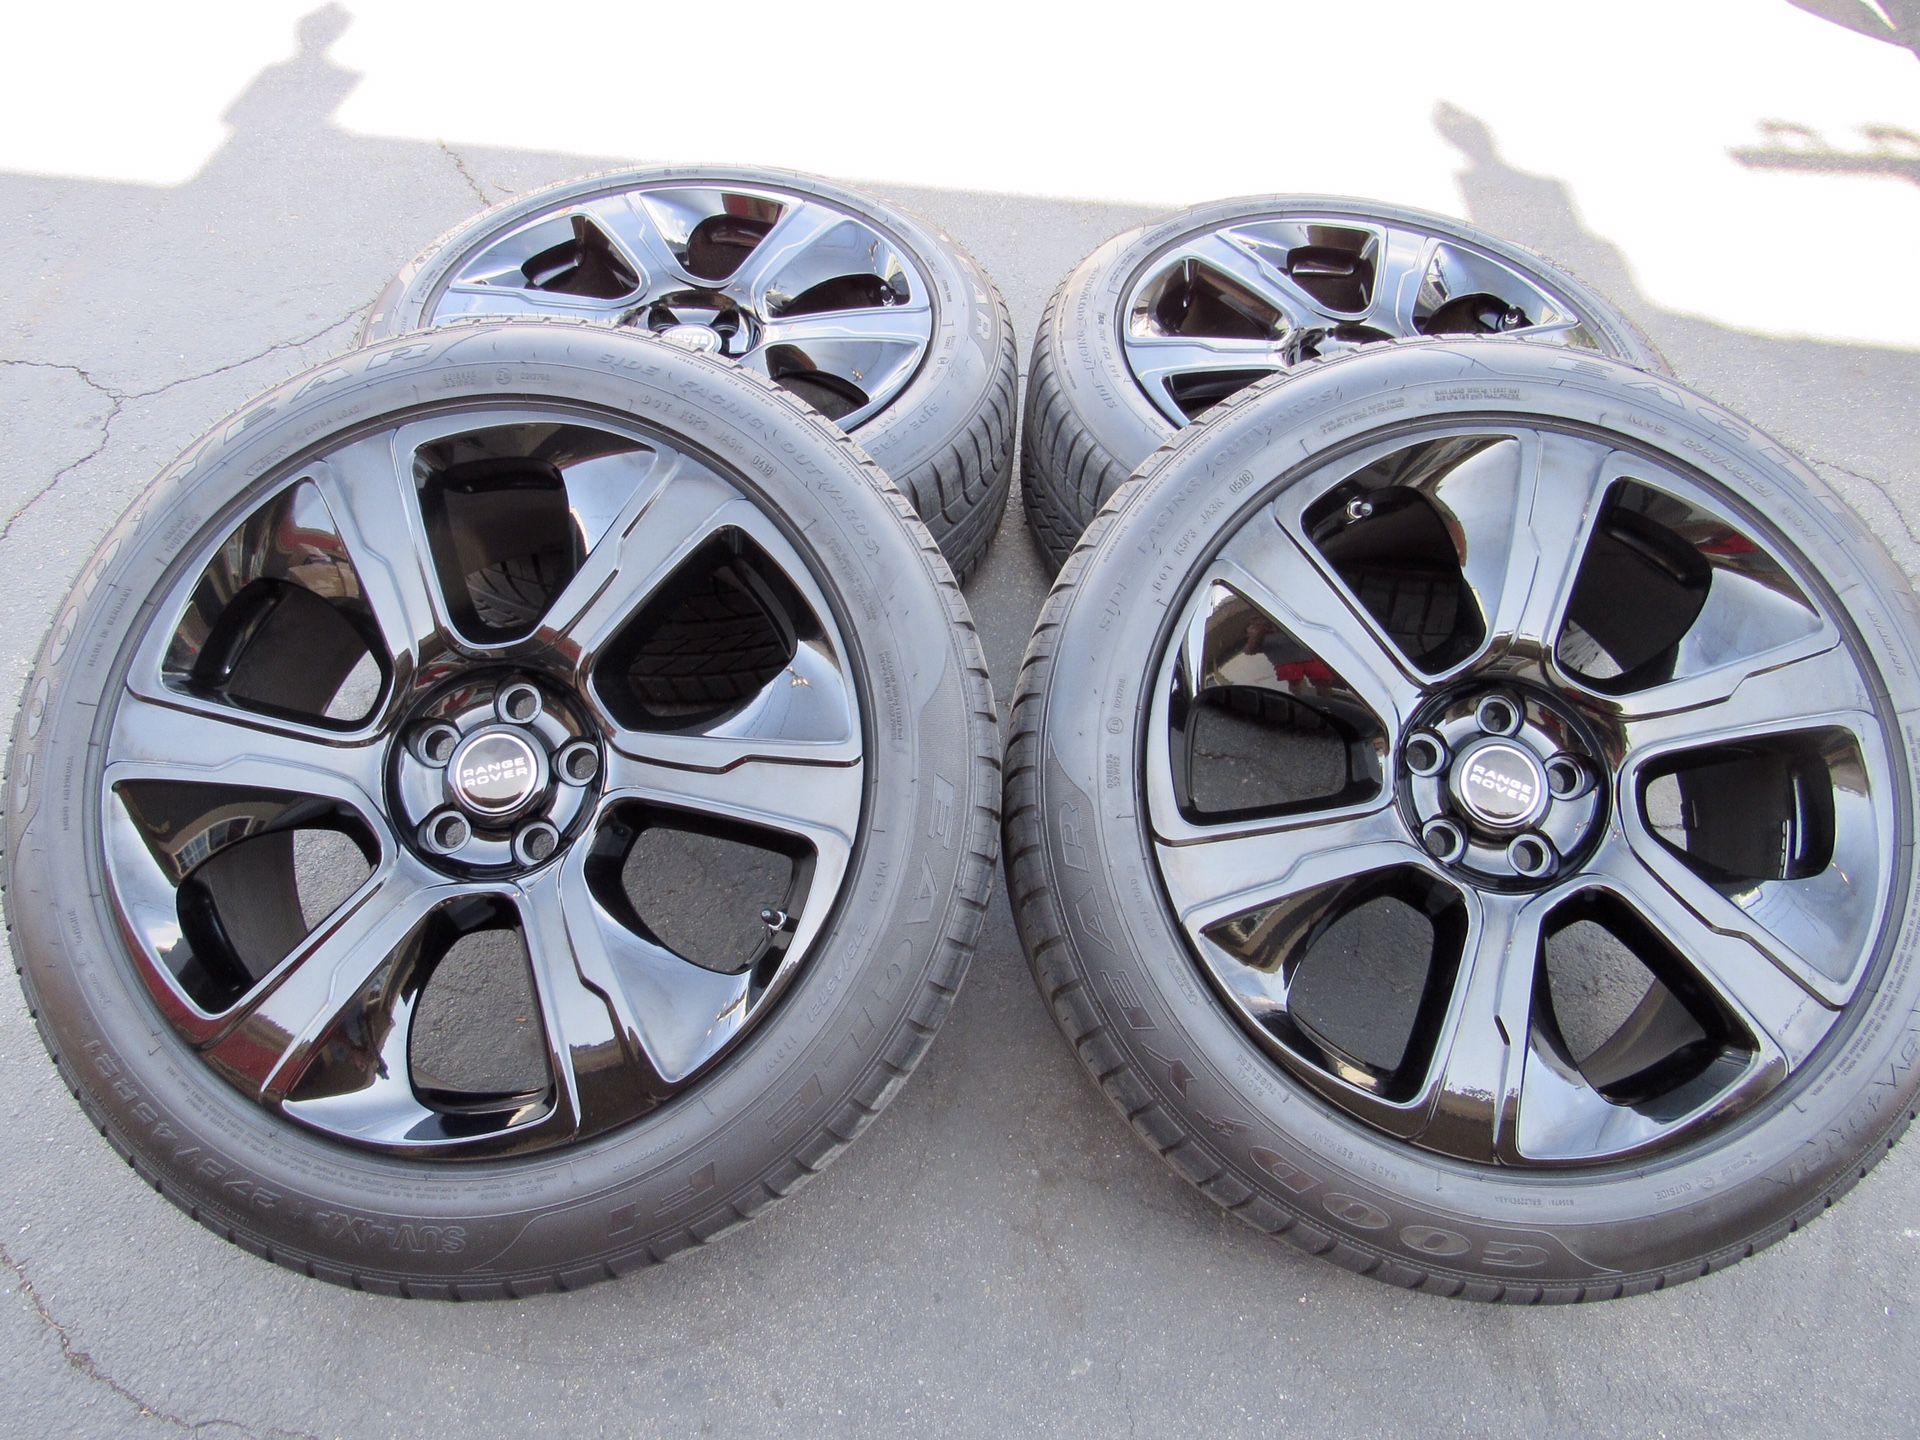 21” oem Range Rover Land Rover factory wheels 21 inch gloss black rims Rover sport Goodyear tires